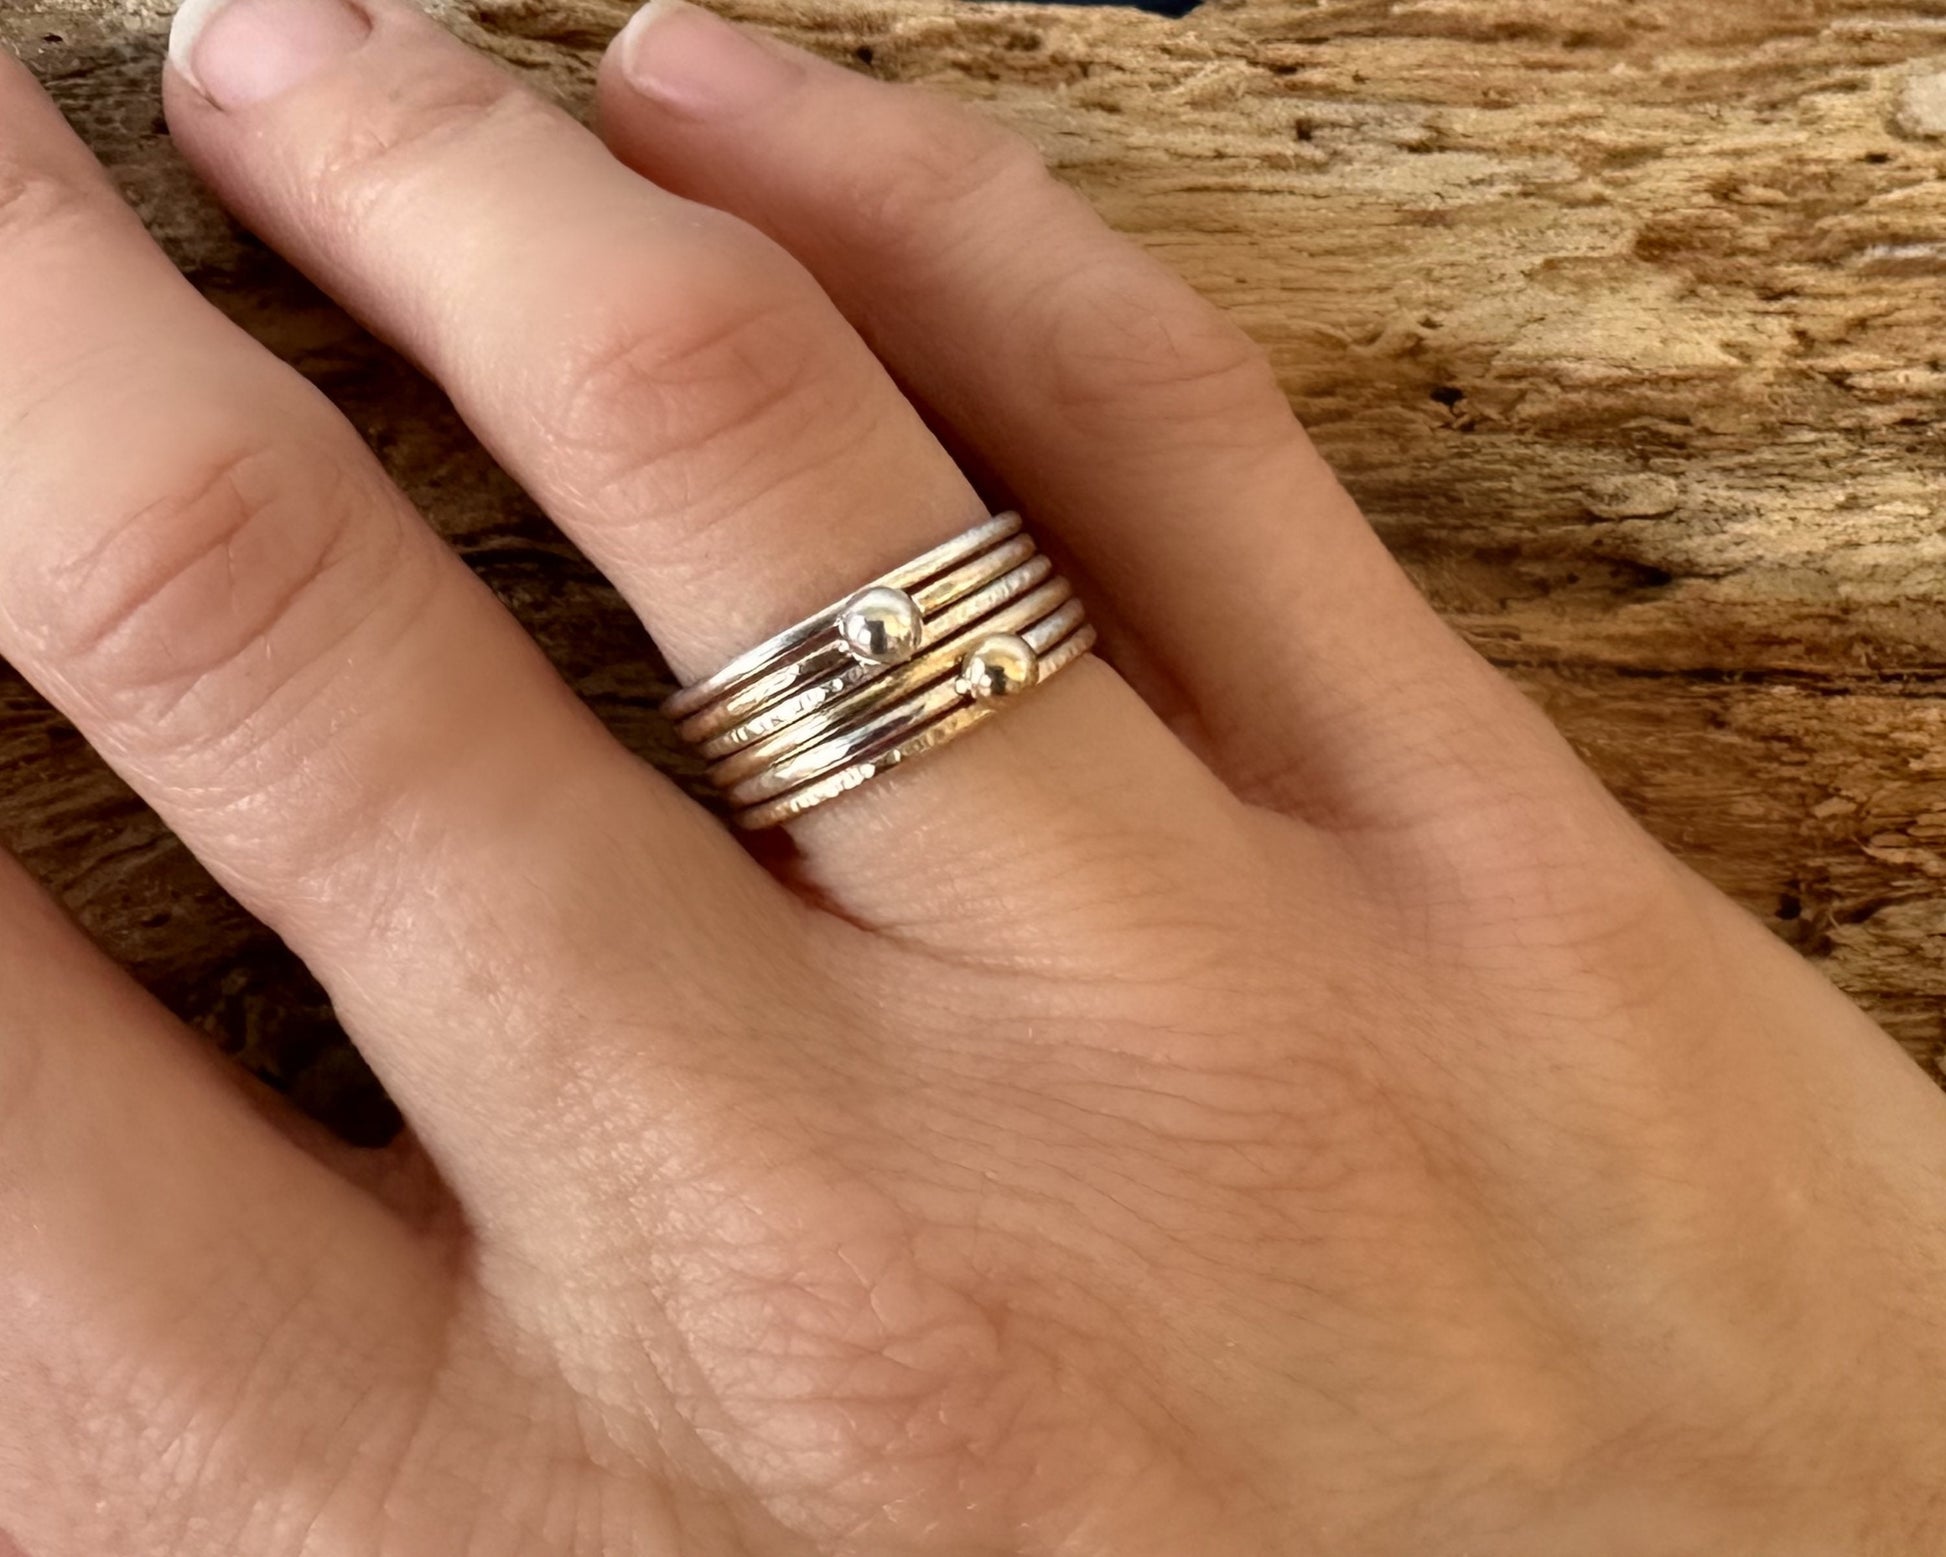 Skinny 1.2mm 9ct Gold Ring, Plain and Simple Minimalist Ring Band, Hadmade Gold Stackable Ring, Wedding Ring Band